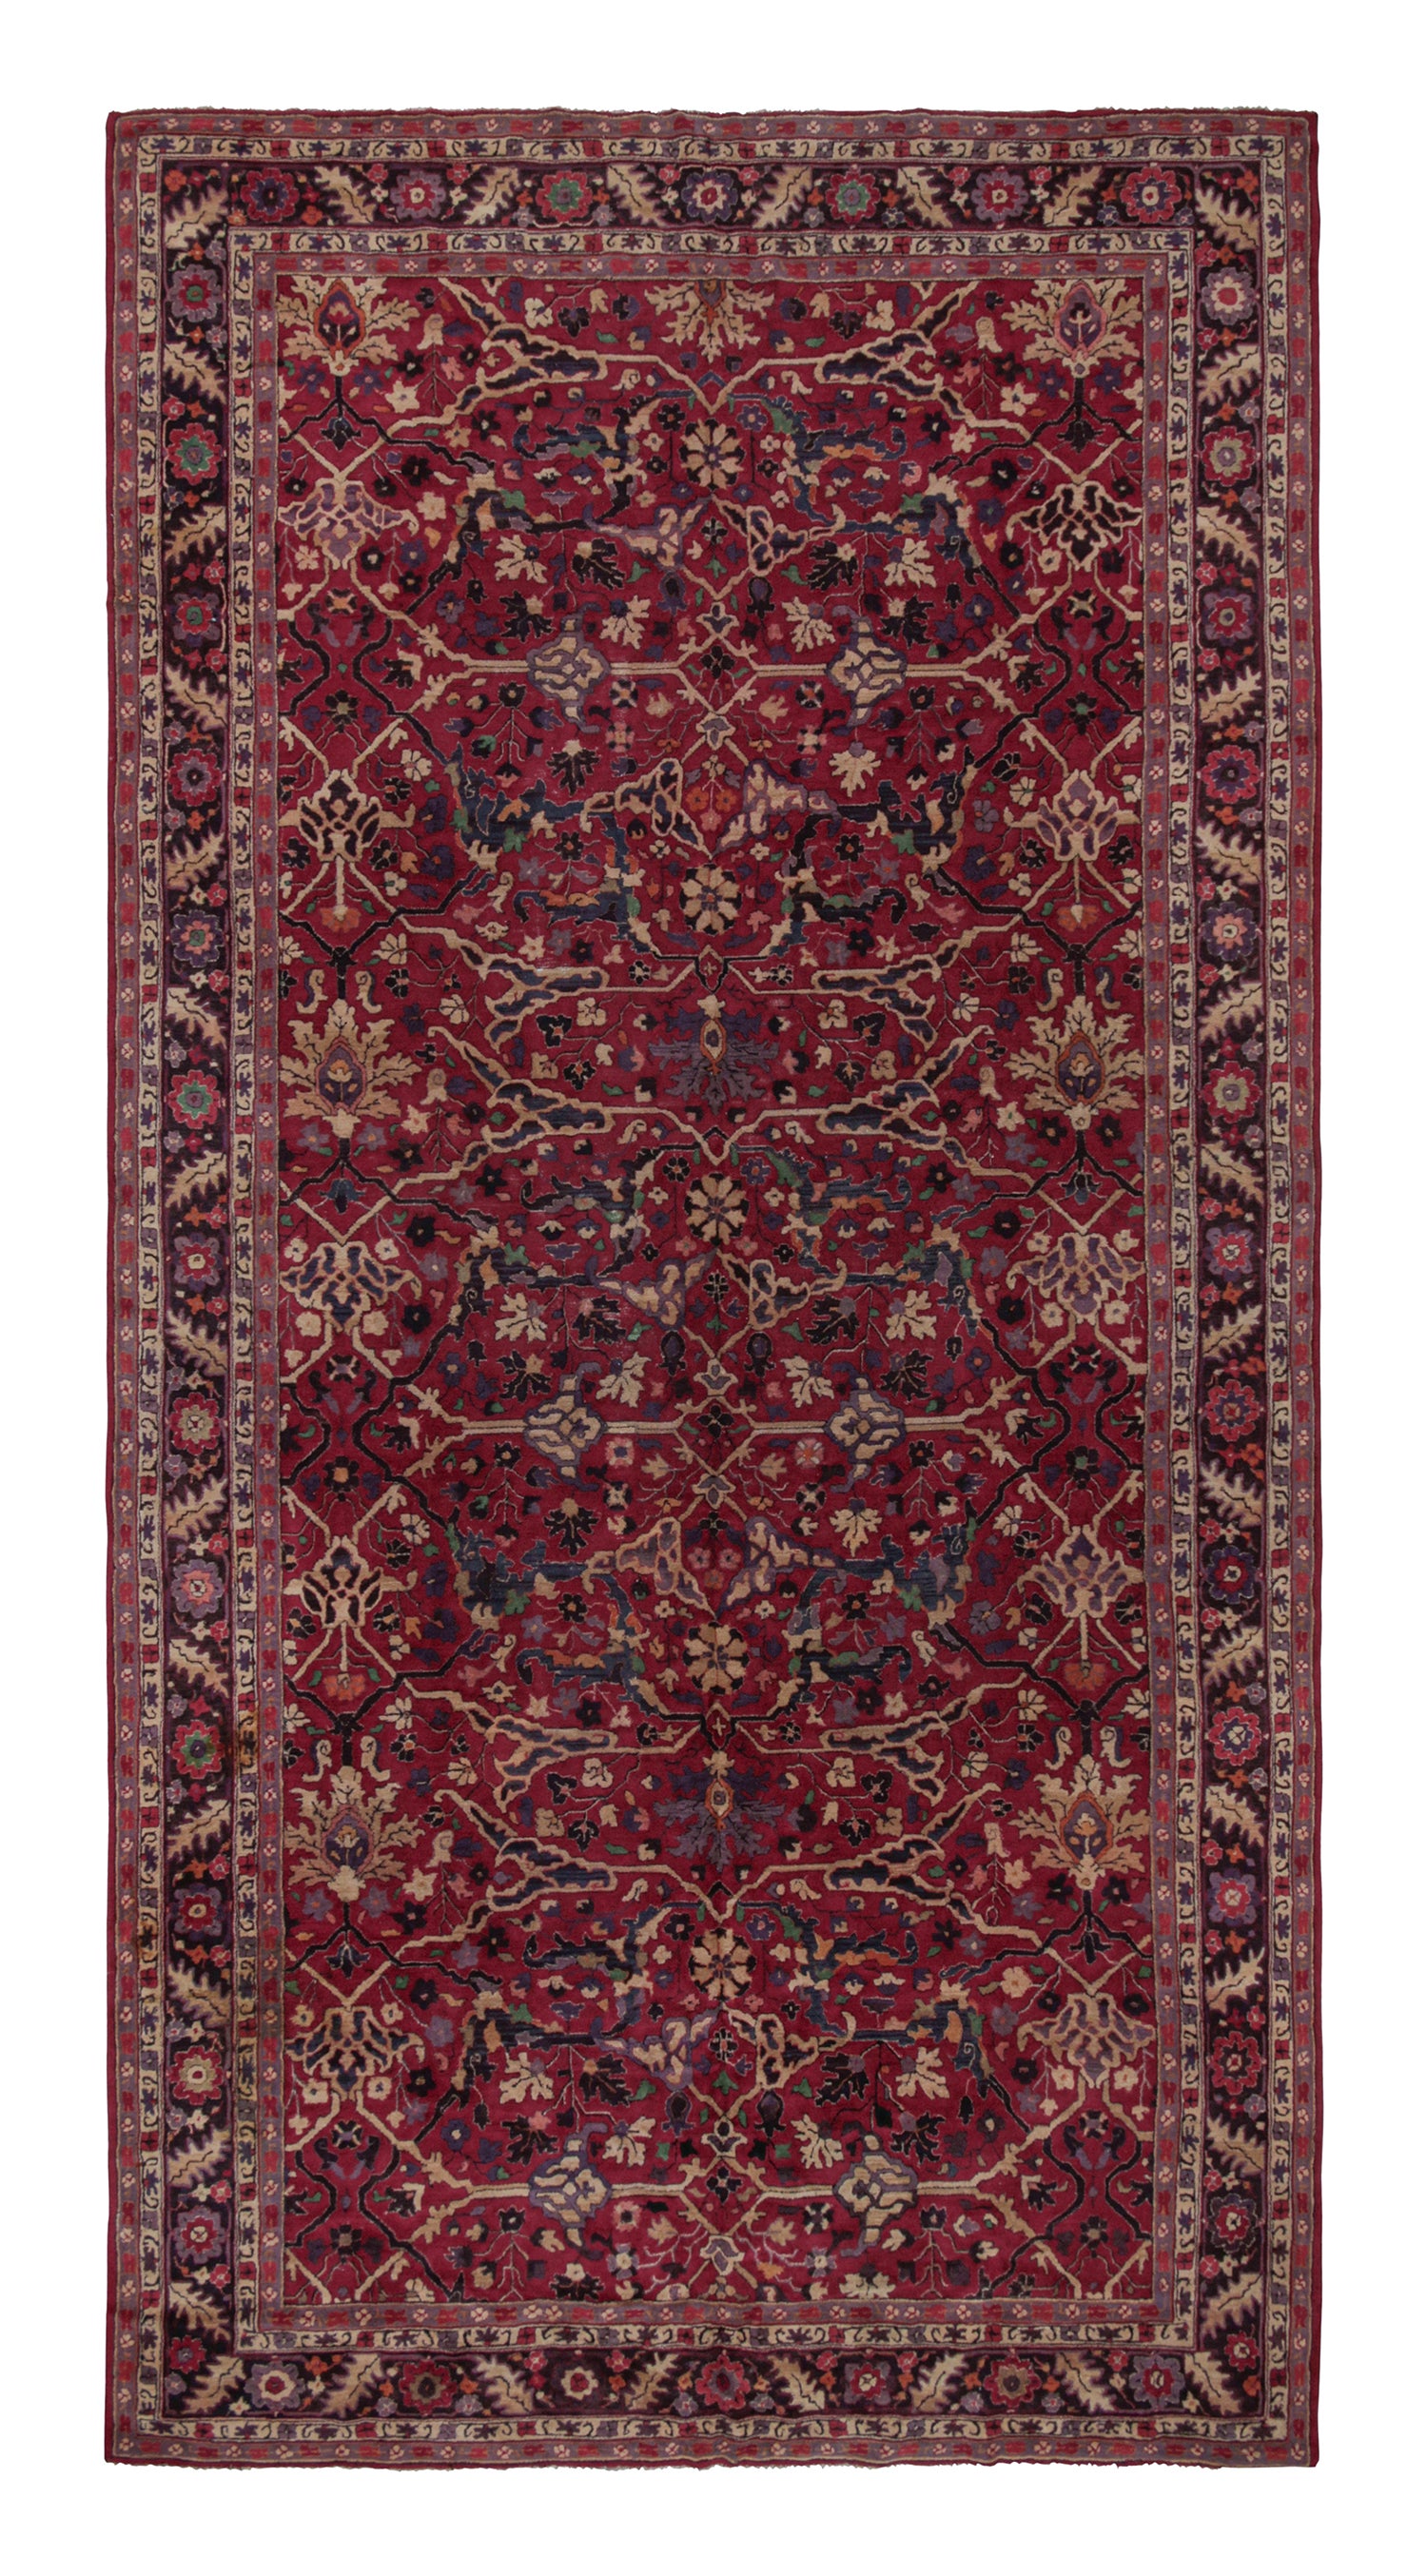 Antique Hooked Rug in Rich Burgundy with Beige and Purple Floral by Rug & Kilim For Sale